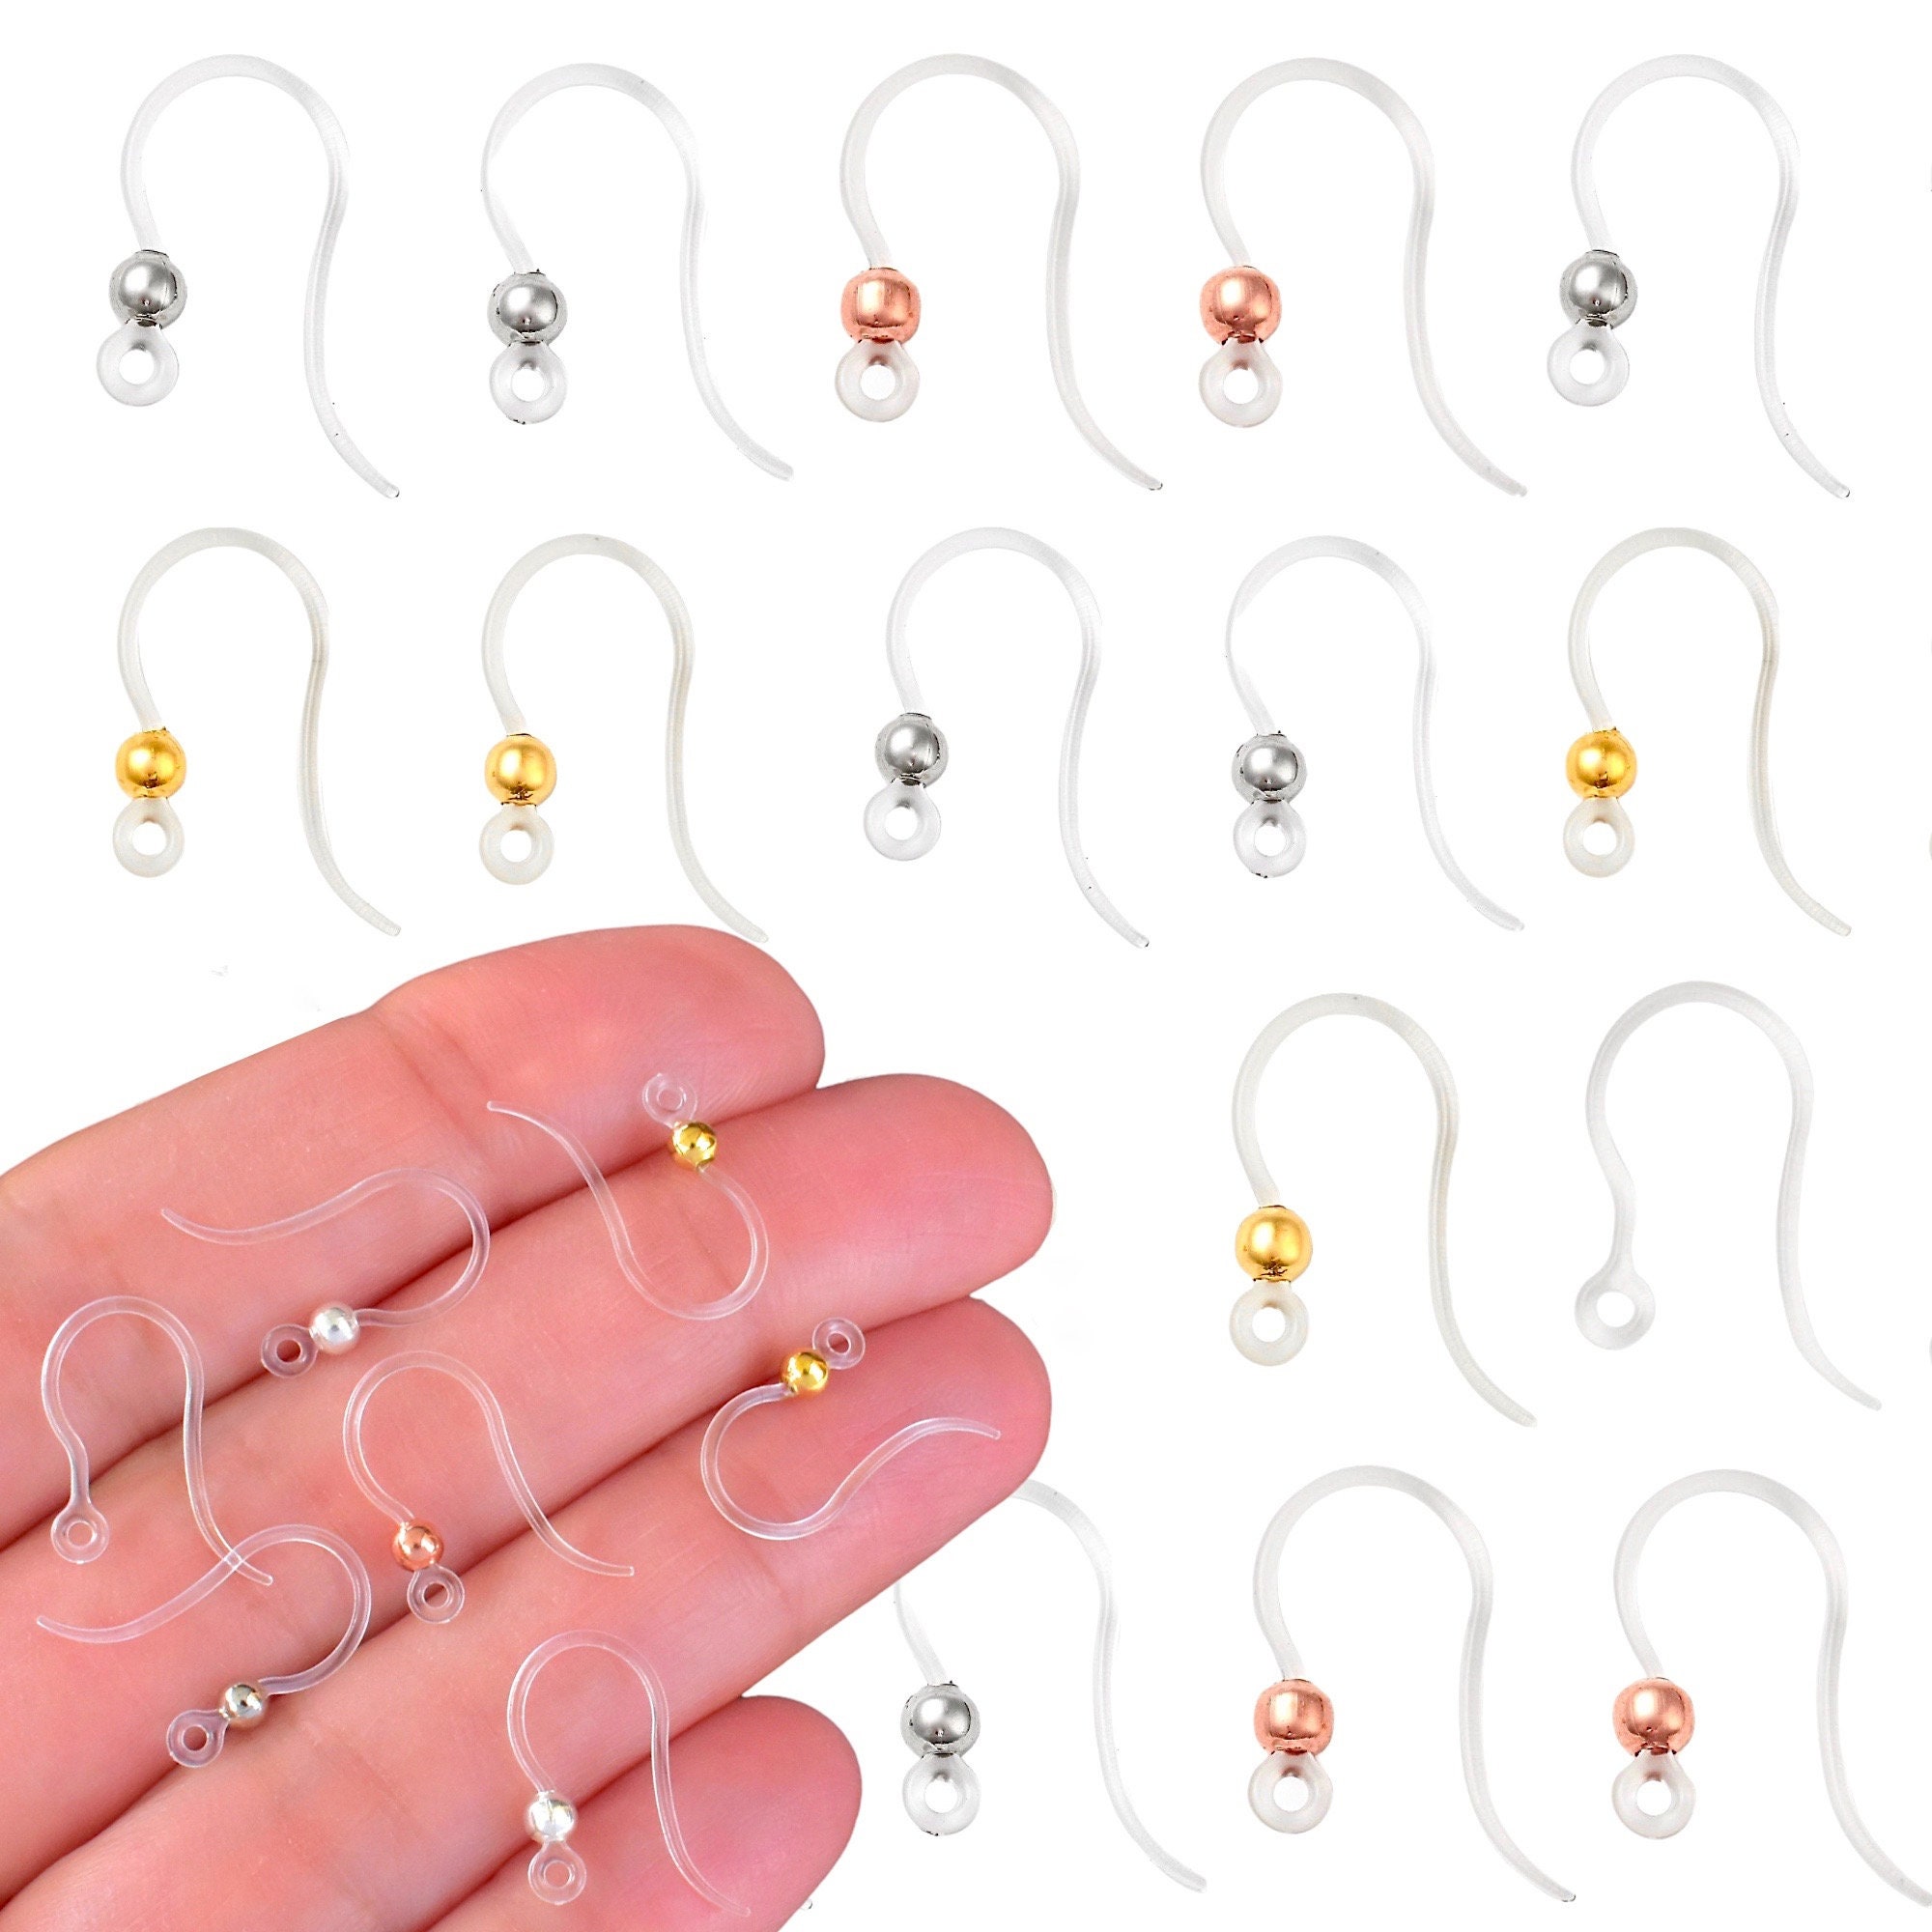 HGYCPP Fashion Ear Wires Ball End Earring Hooks Hypoallergenic Earring  Making Kit 100x Upgraded Premium Ear Line Fish Hook 